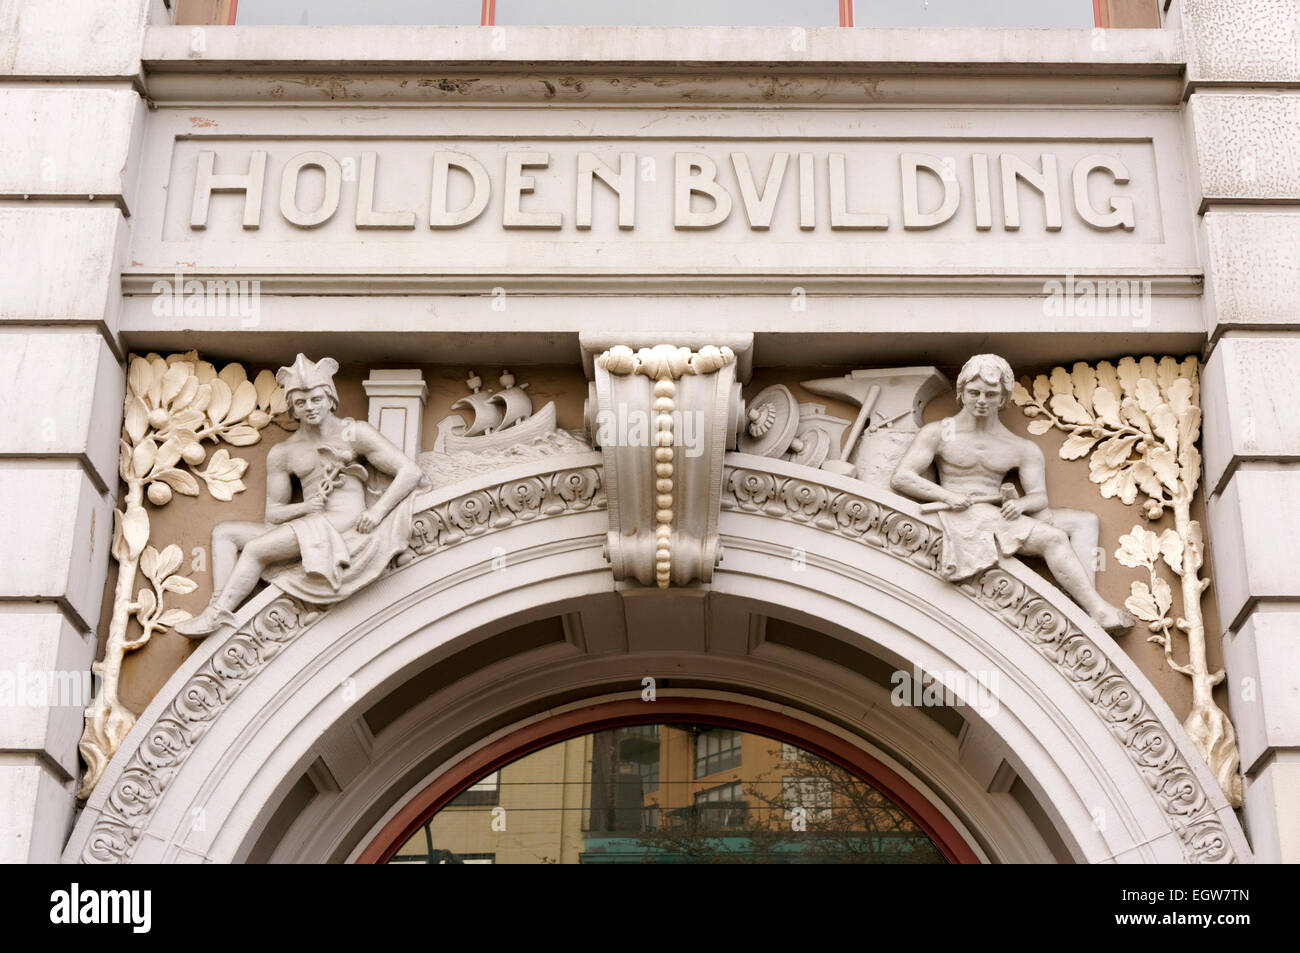 Decorated Romanesque arch of the Chicago-style Holden Building (1911) on East Hastings Street, Vancouver, BC, Canada Stock Photo